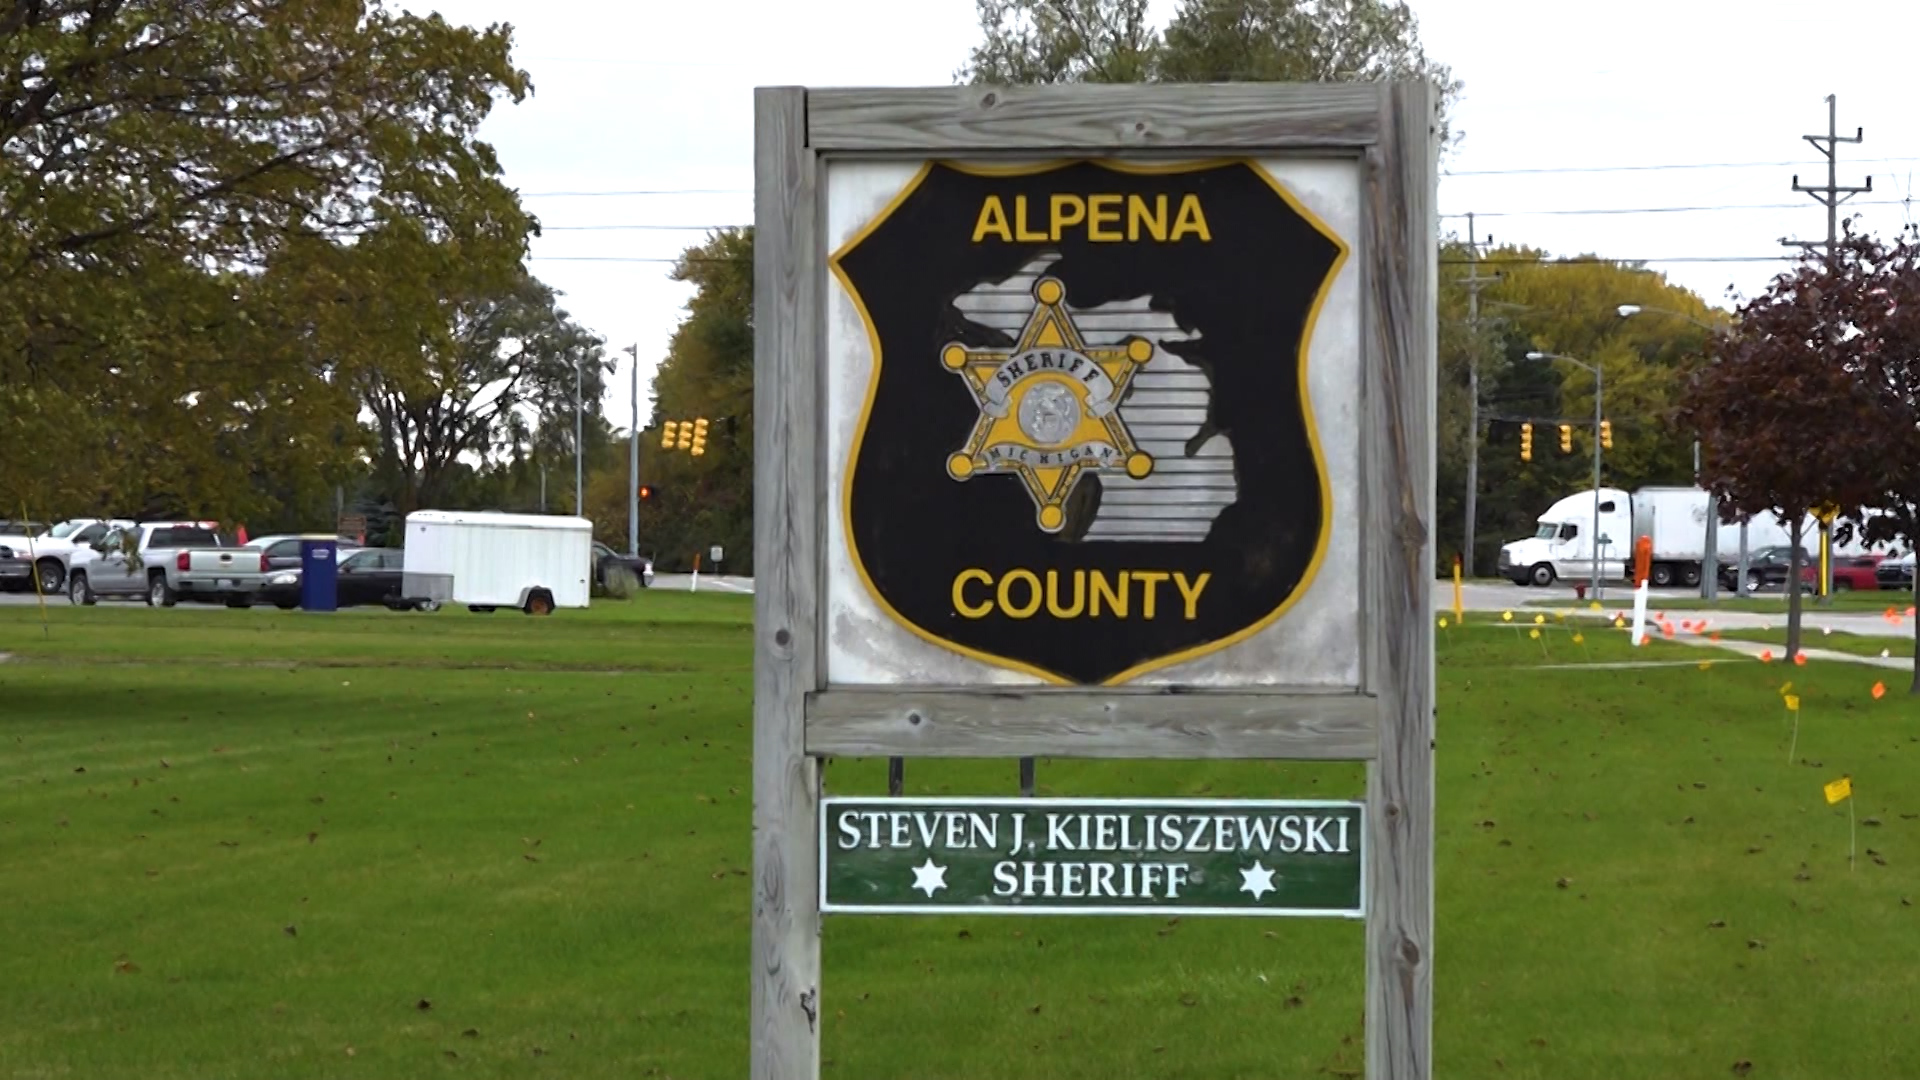 COVID outbreak at Alpena County Jail WBKB 11